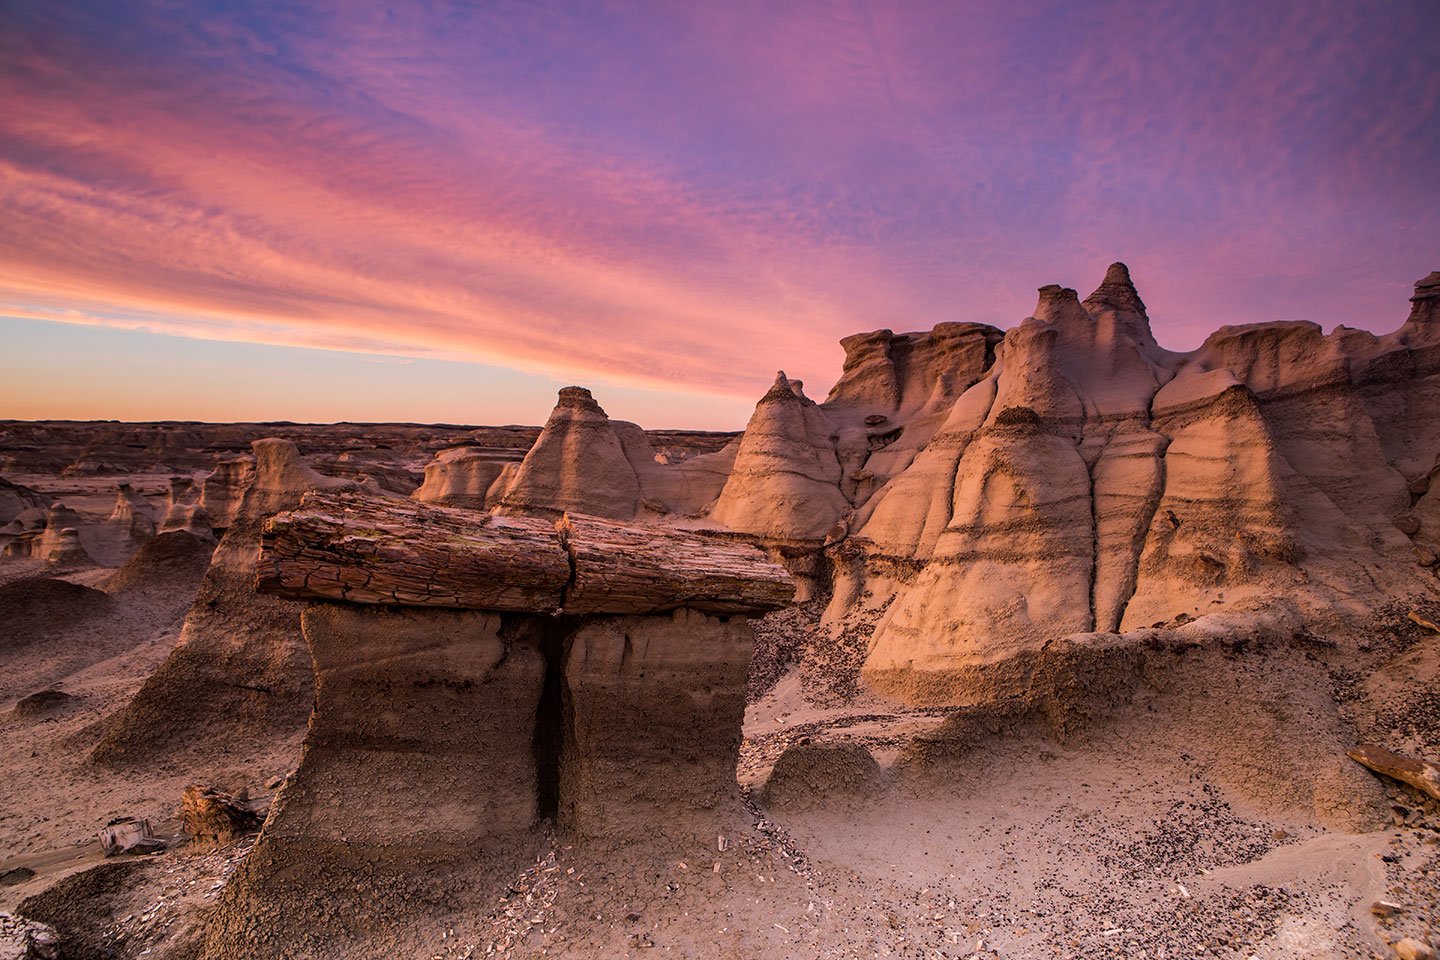 Sunset over the hoodoos of Bisti Badlands, New Mexico